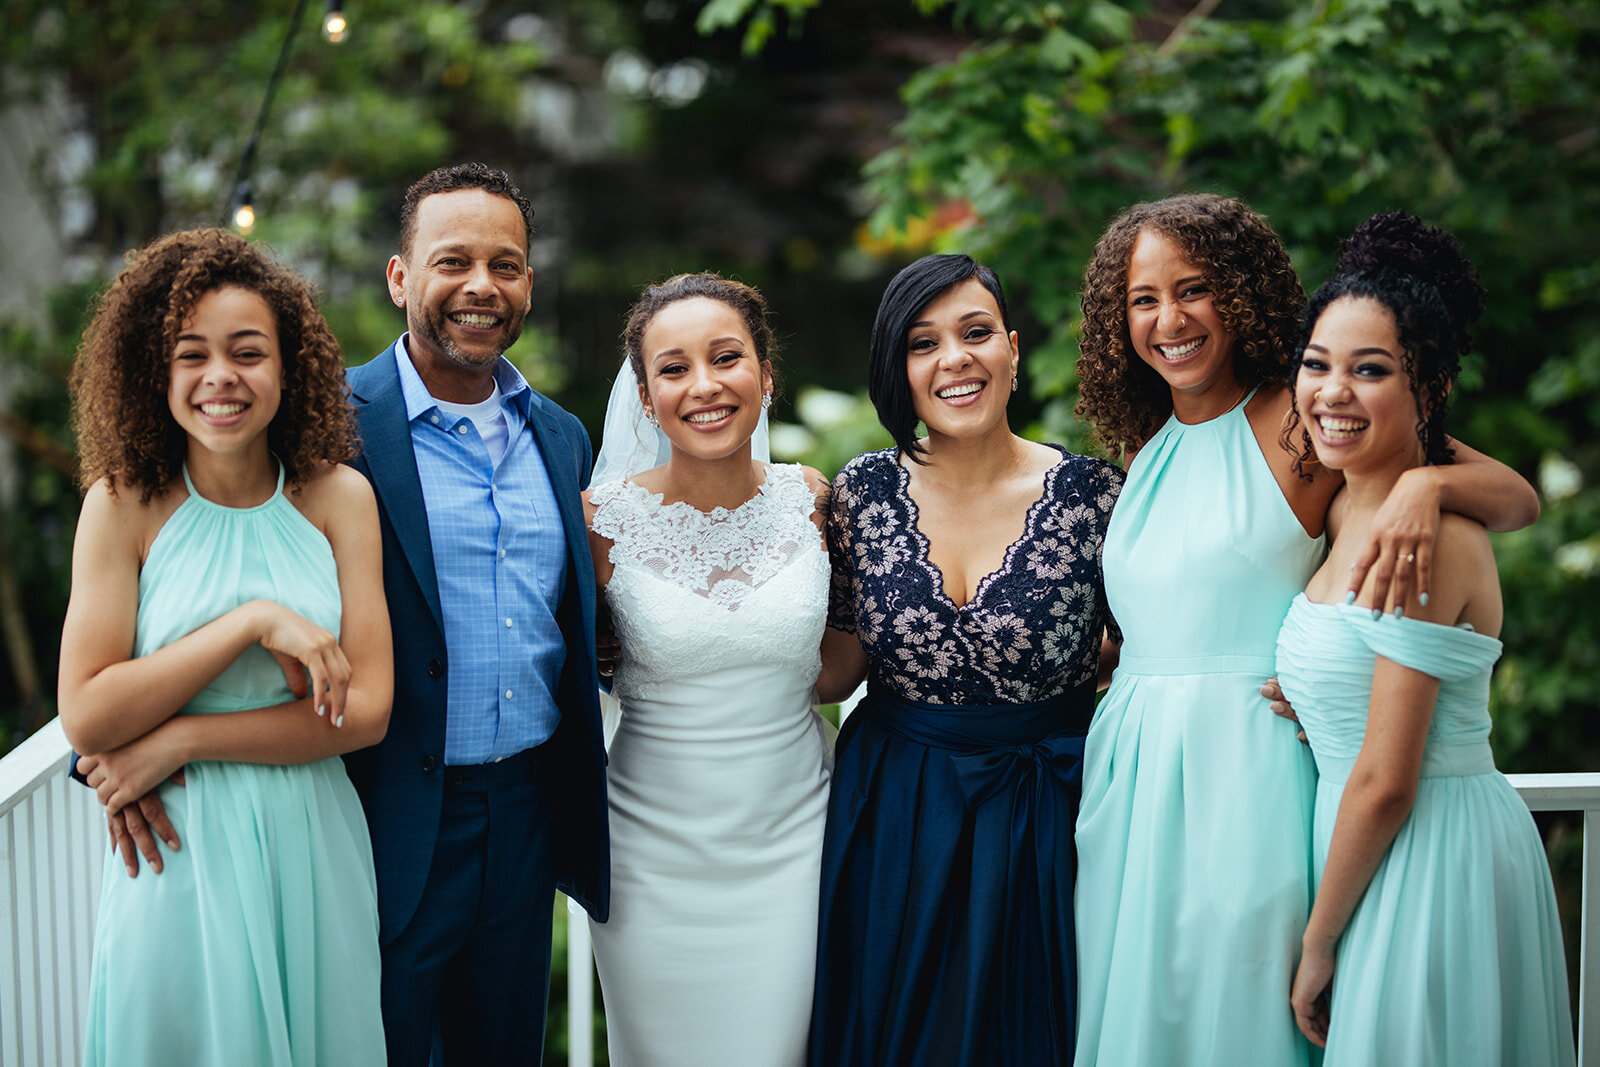 Bride with family and bridesmaids in Annapolis MD Shawnee Custalow Wedding Photography